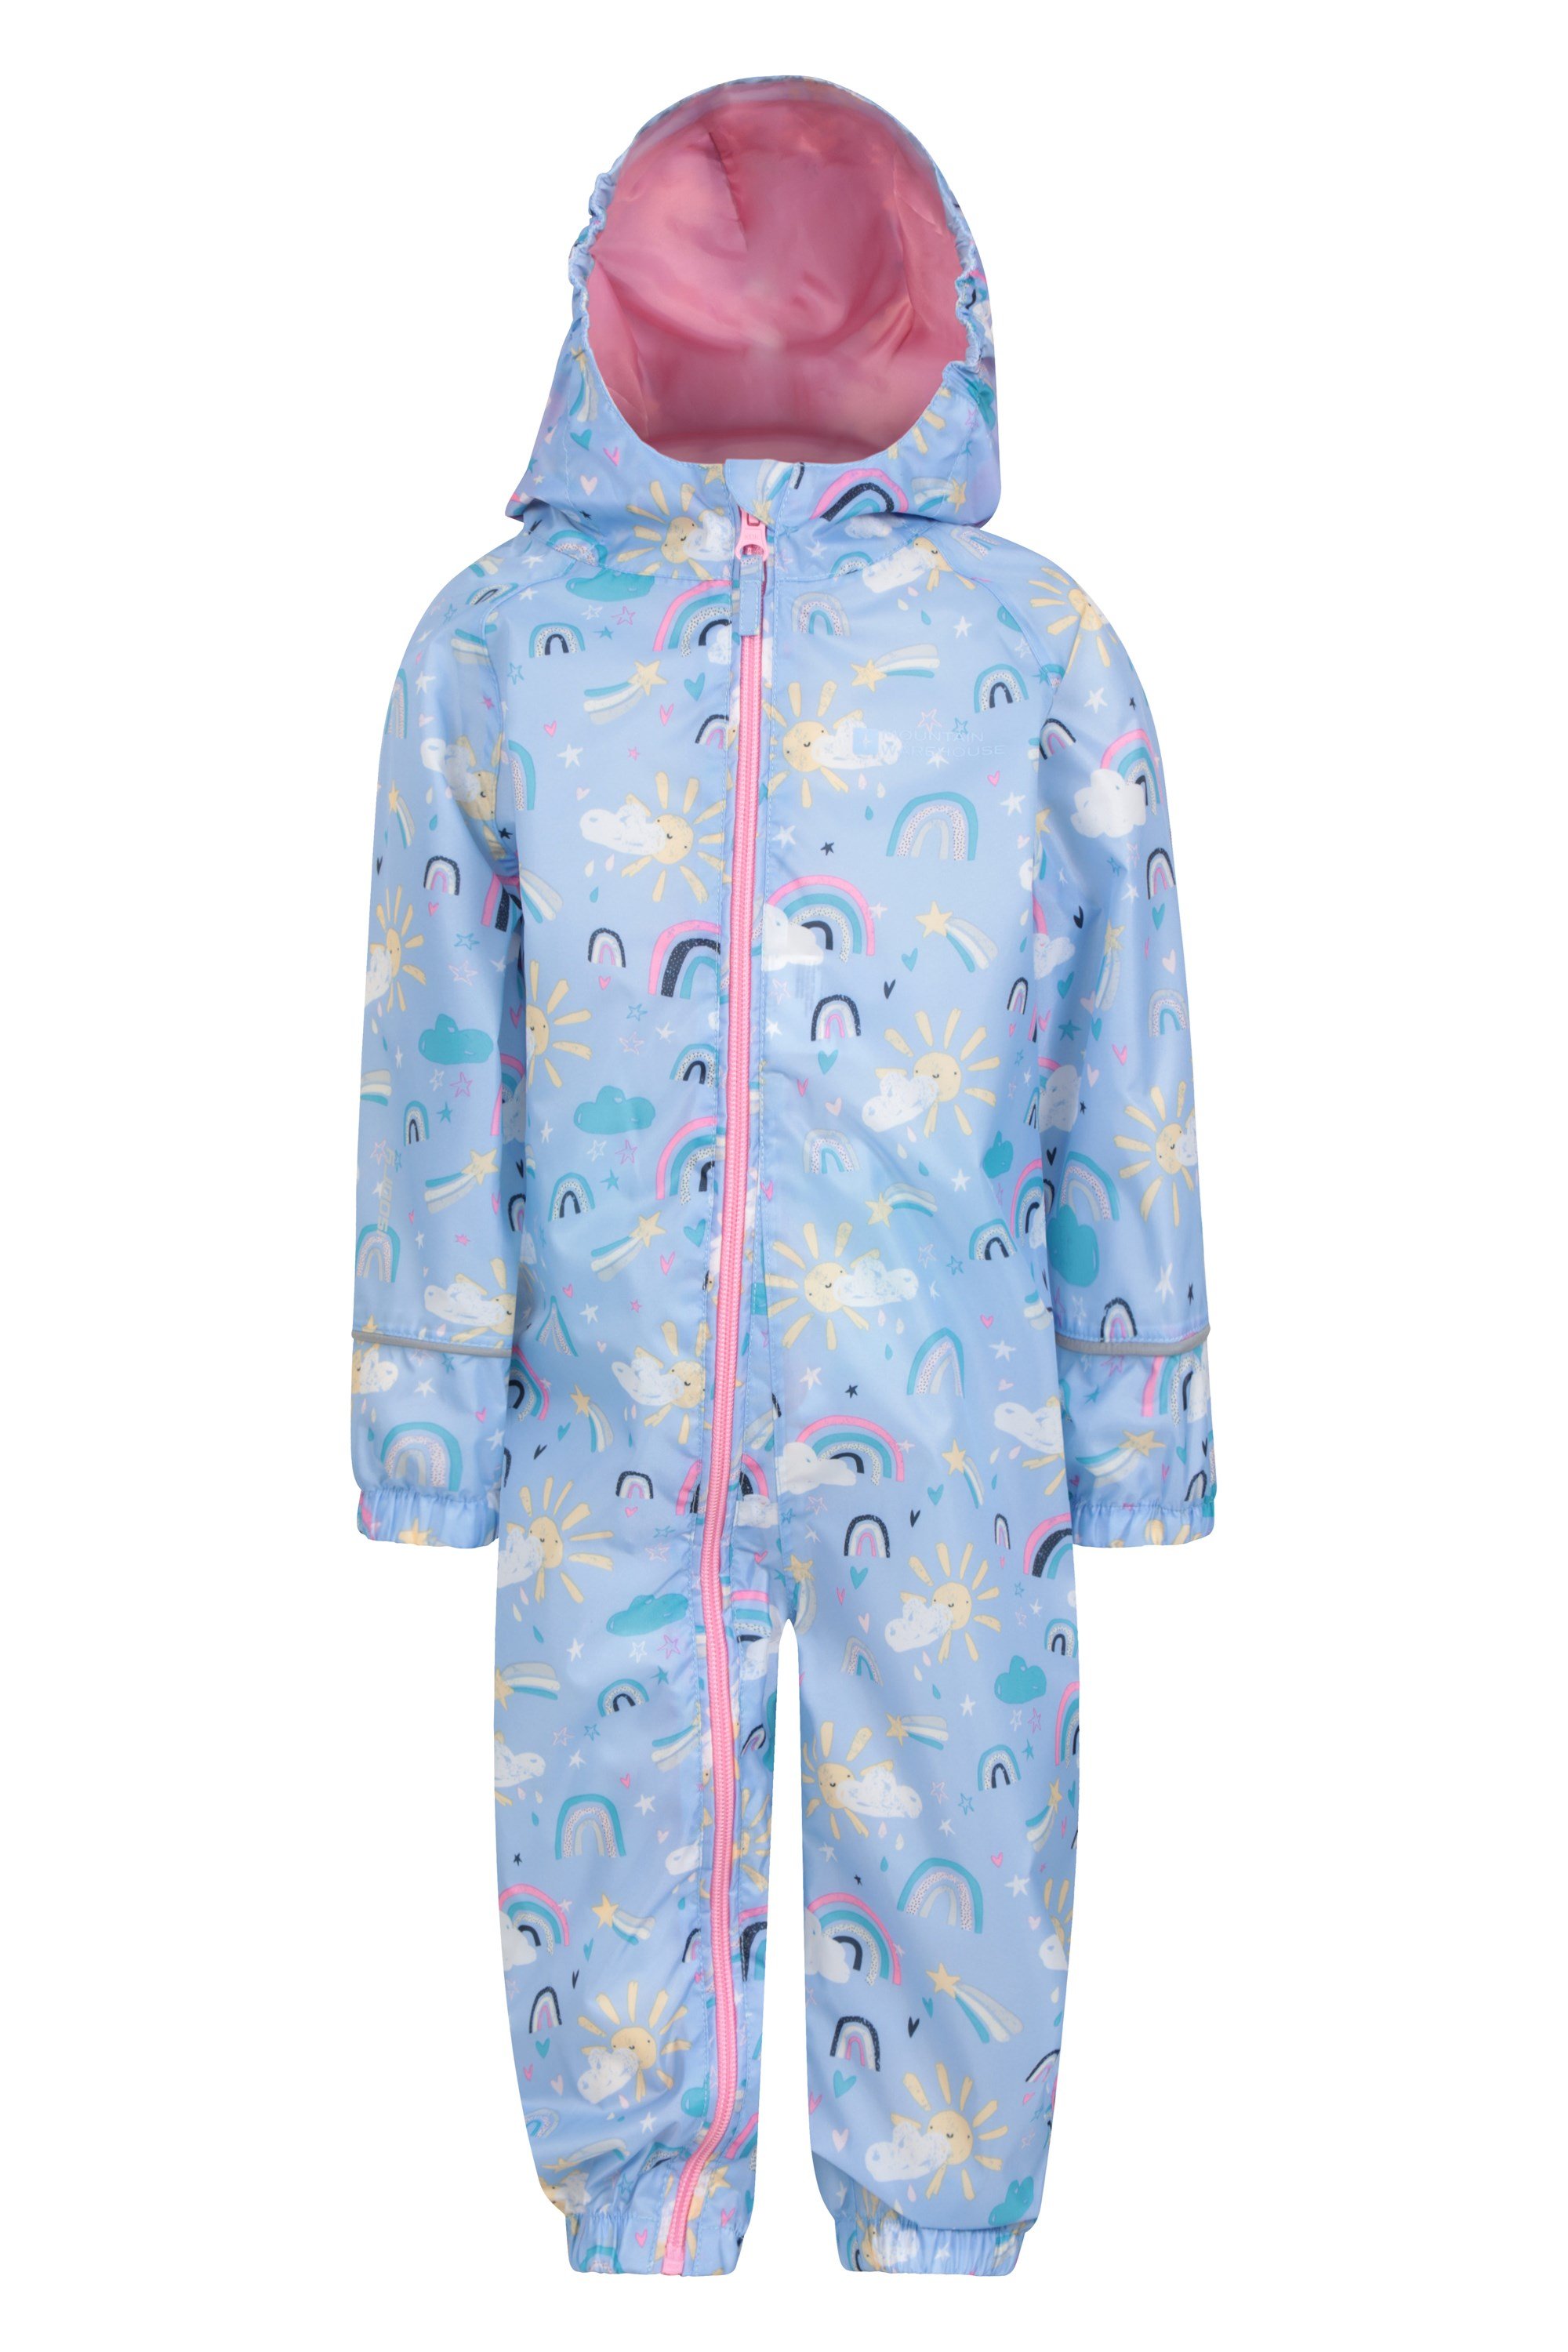 TOGZ  KIDS UNLINED  ALL IN ONE  WATERPROOF  PUDDLE SUIT RAINSUIT   9m to 6yrs 